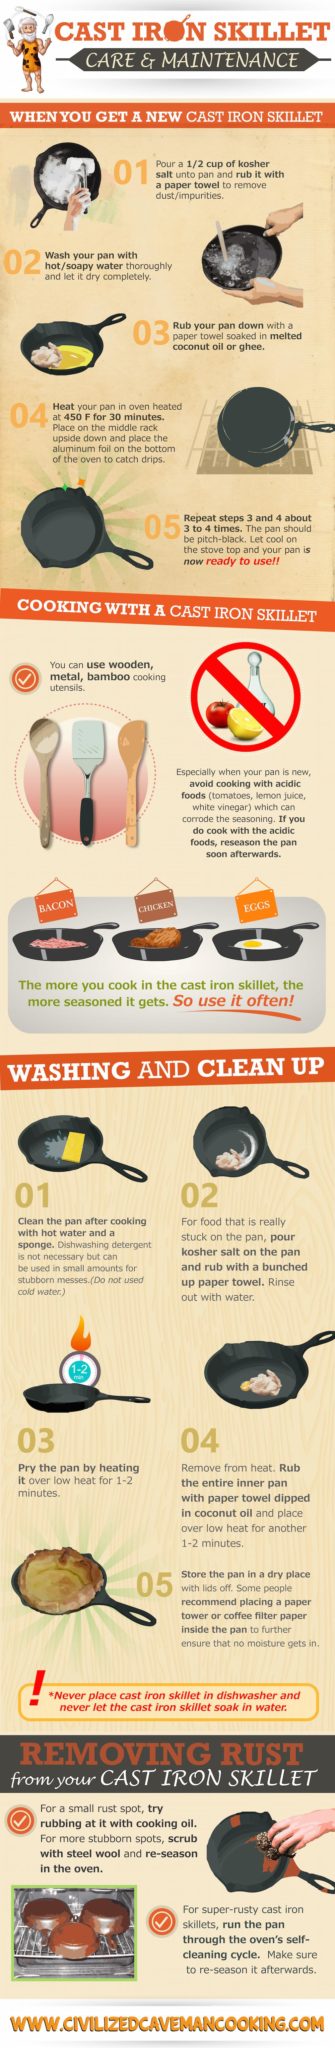 Cast iron skillet care and maintenance